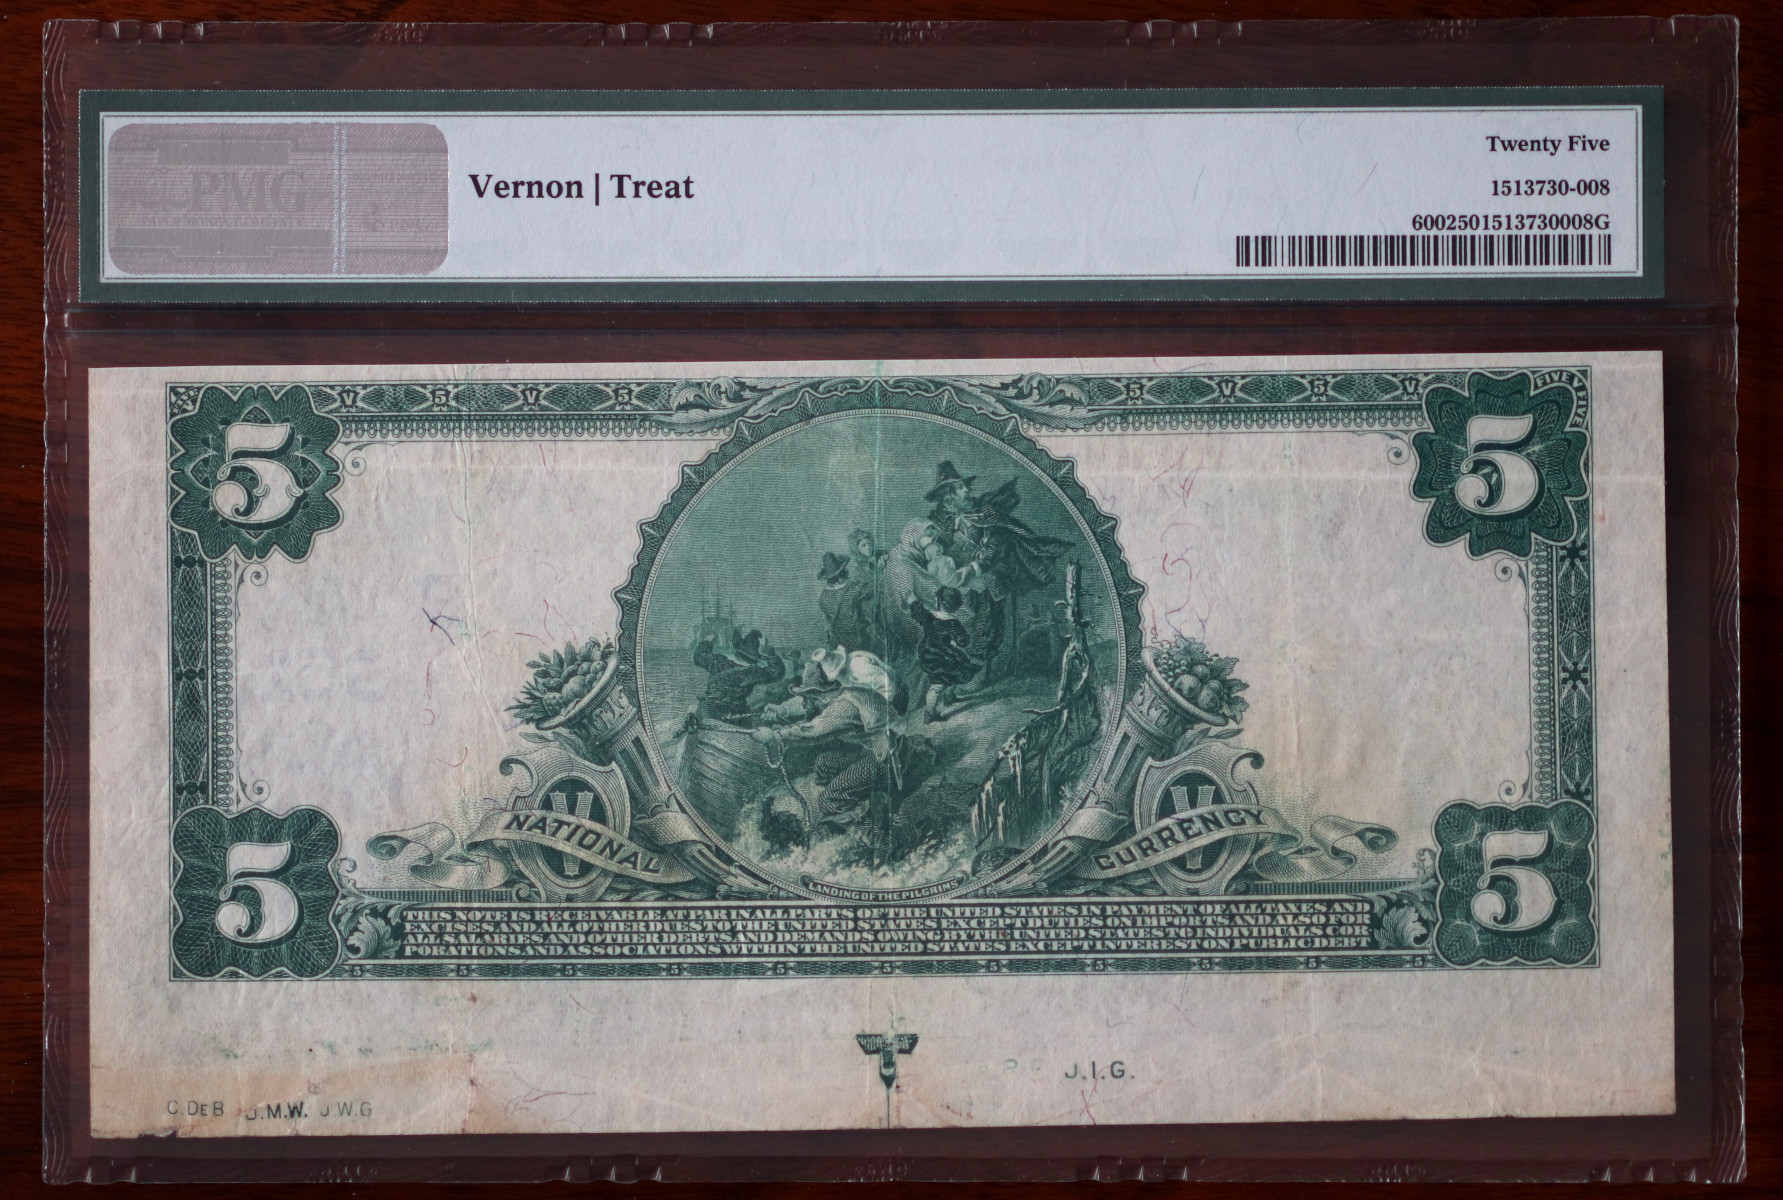 A $5 National Bank Note, Wilmington, certified PMG Very Fine 25, from The South Bay Collection of Rare National Bank Notes, offered by Palos Verdes Coin Exchange